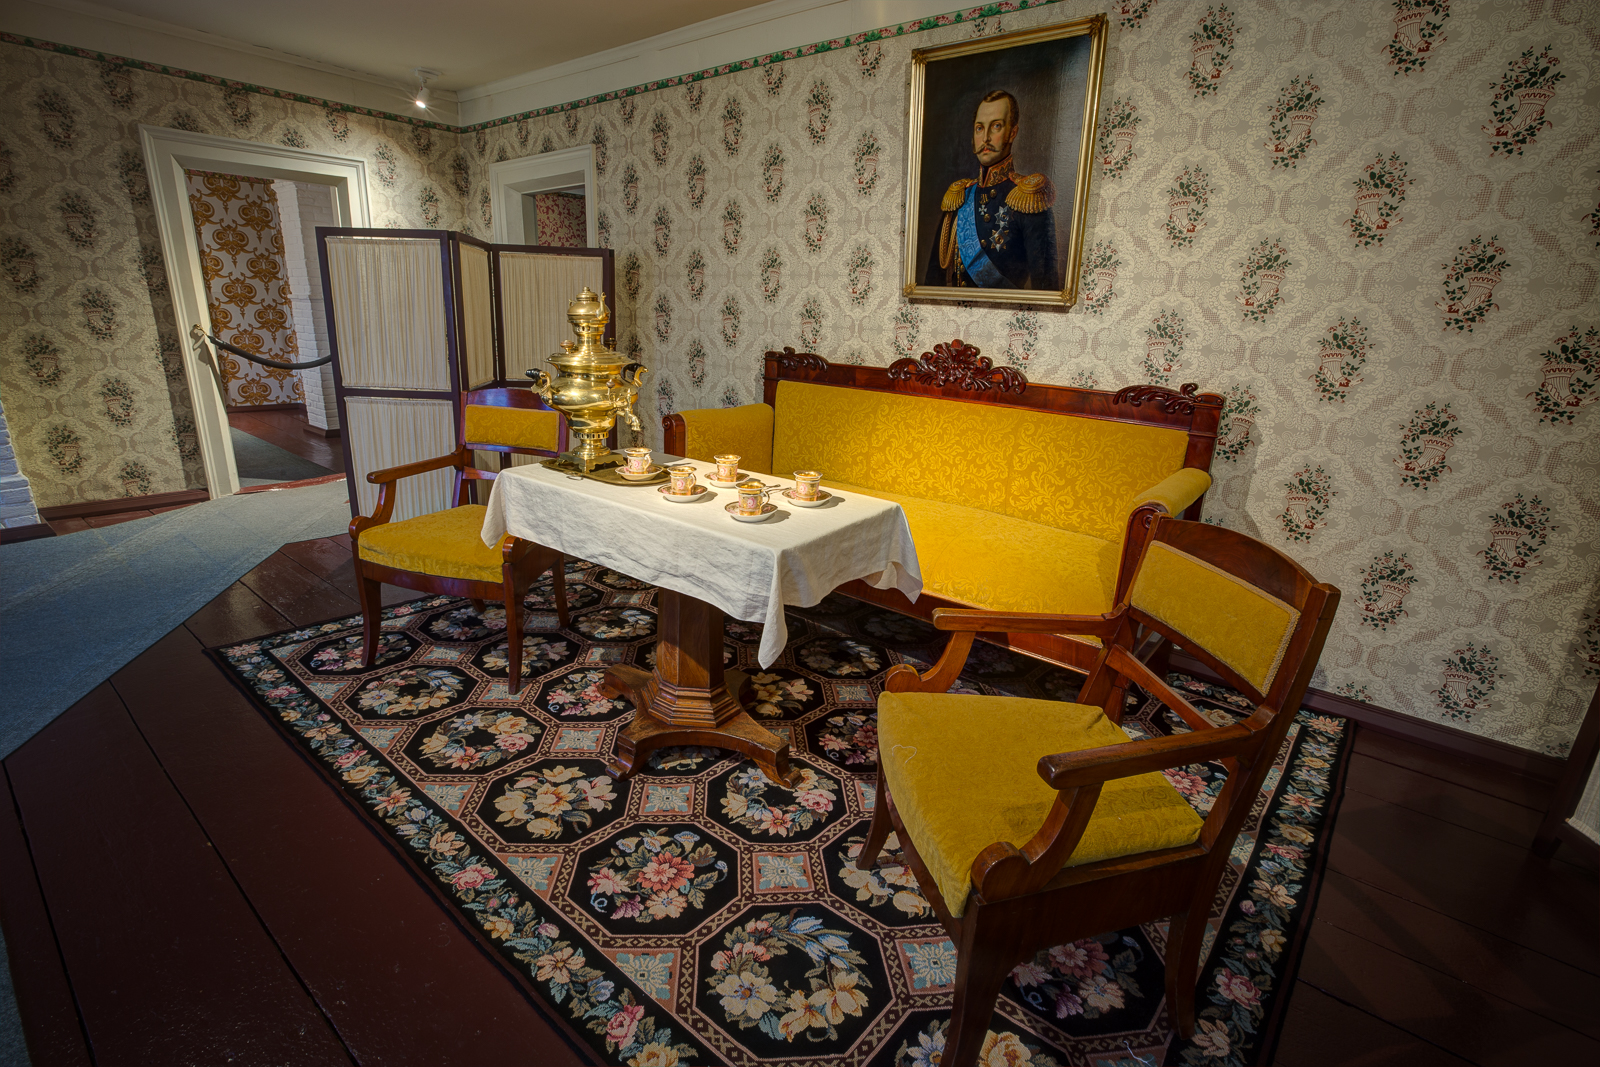 Reception room in the Russian Bishop's House